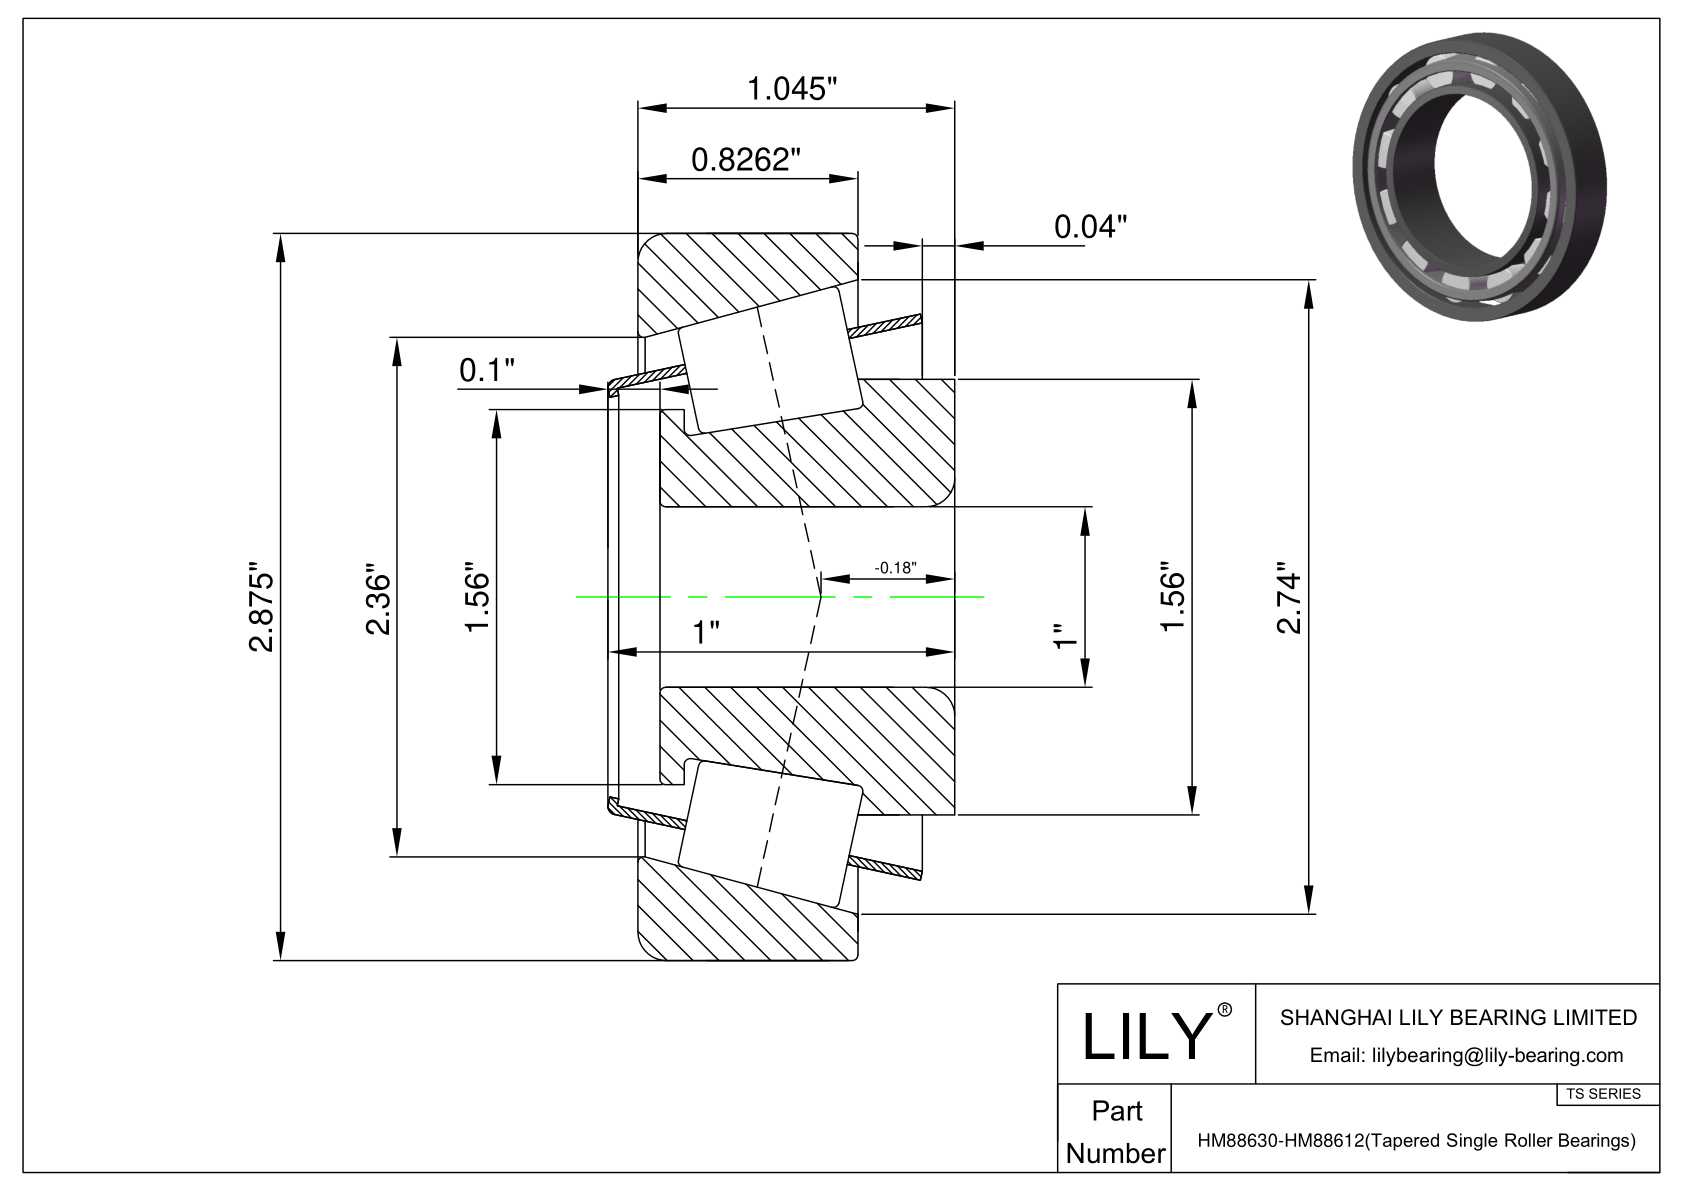 HM88630-HM88612 TS (Tapered Single Roller Bearings) (Imperial) cad drawing